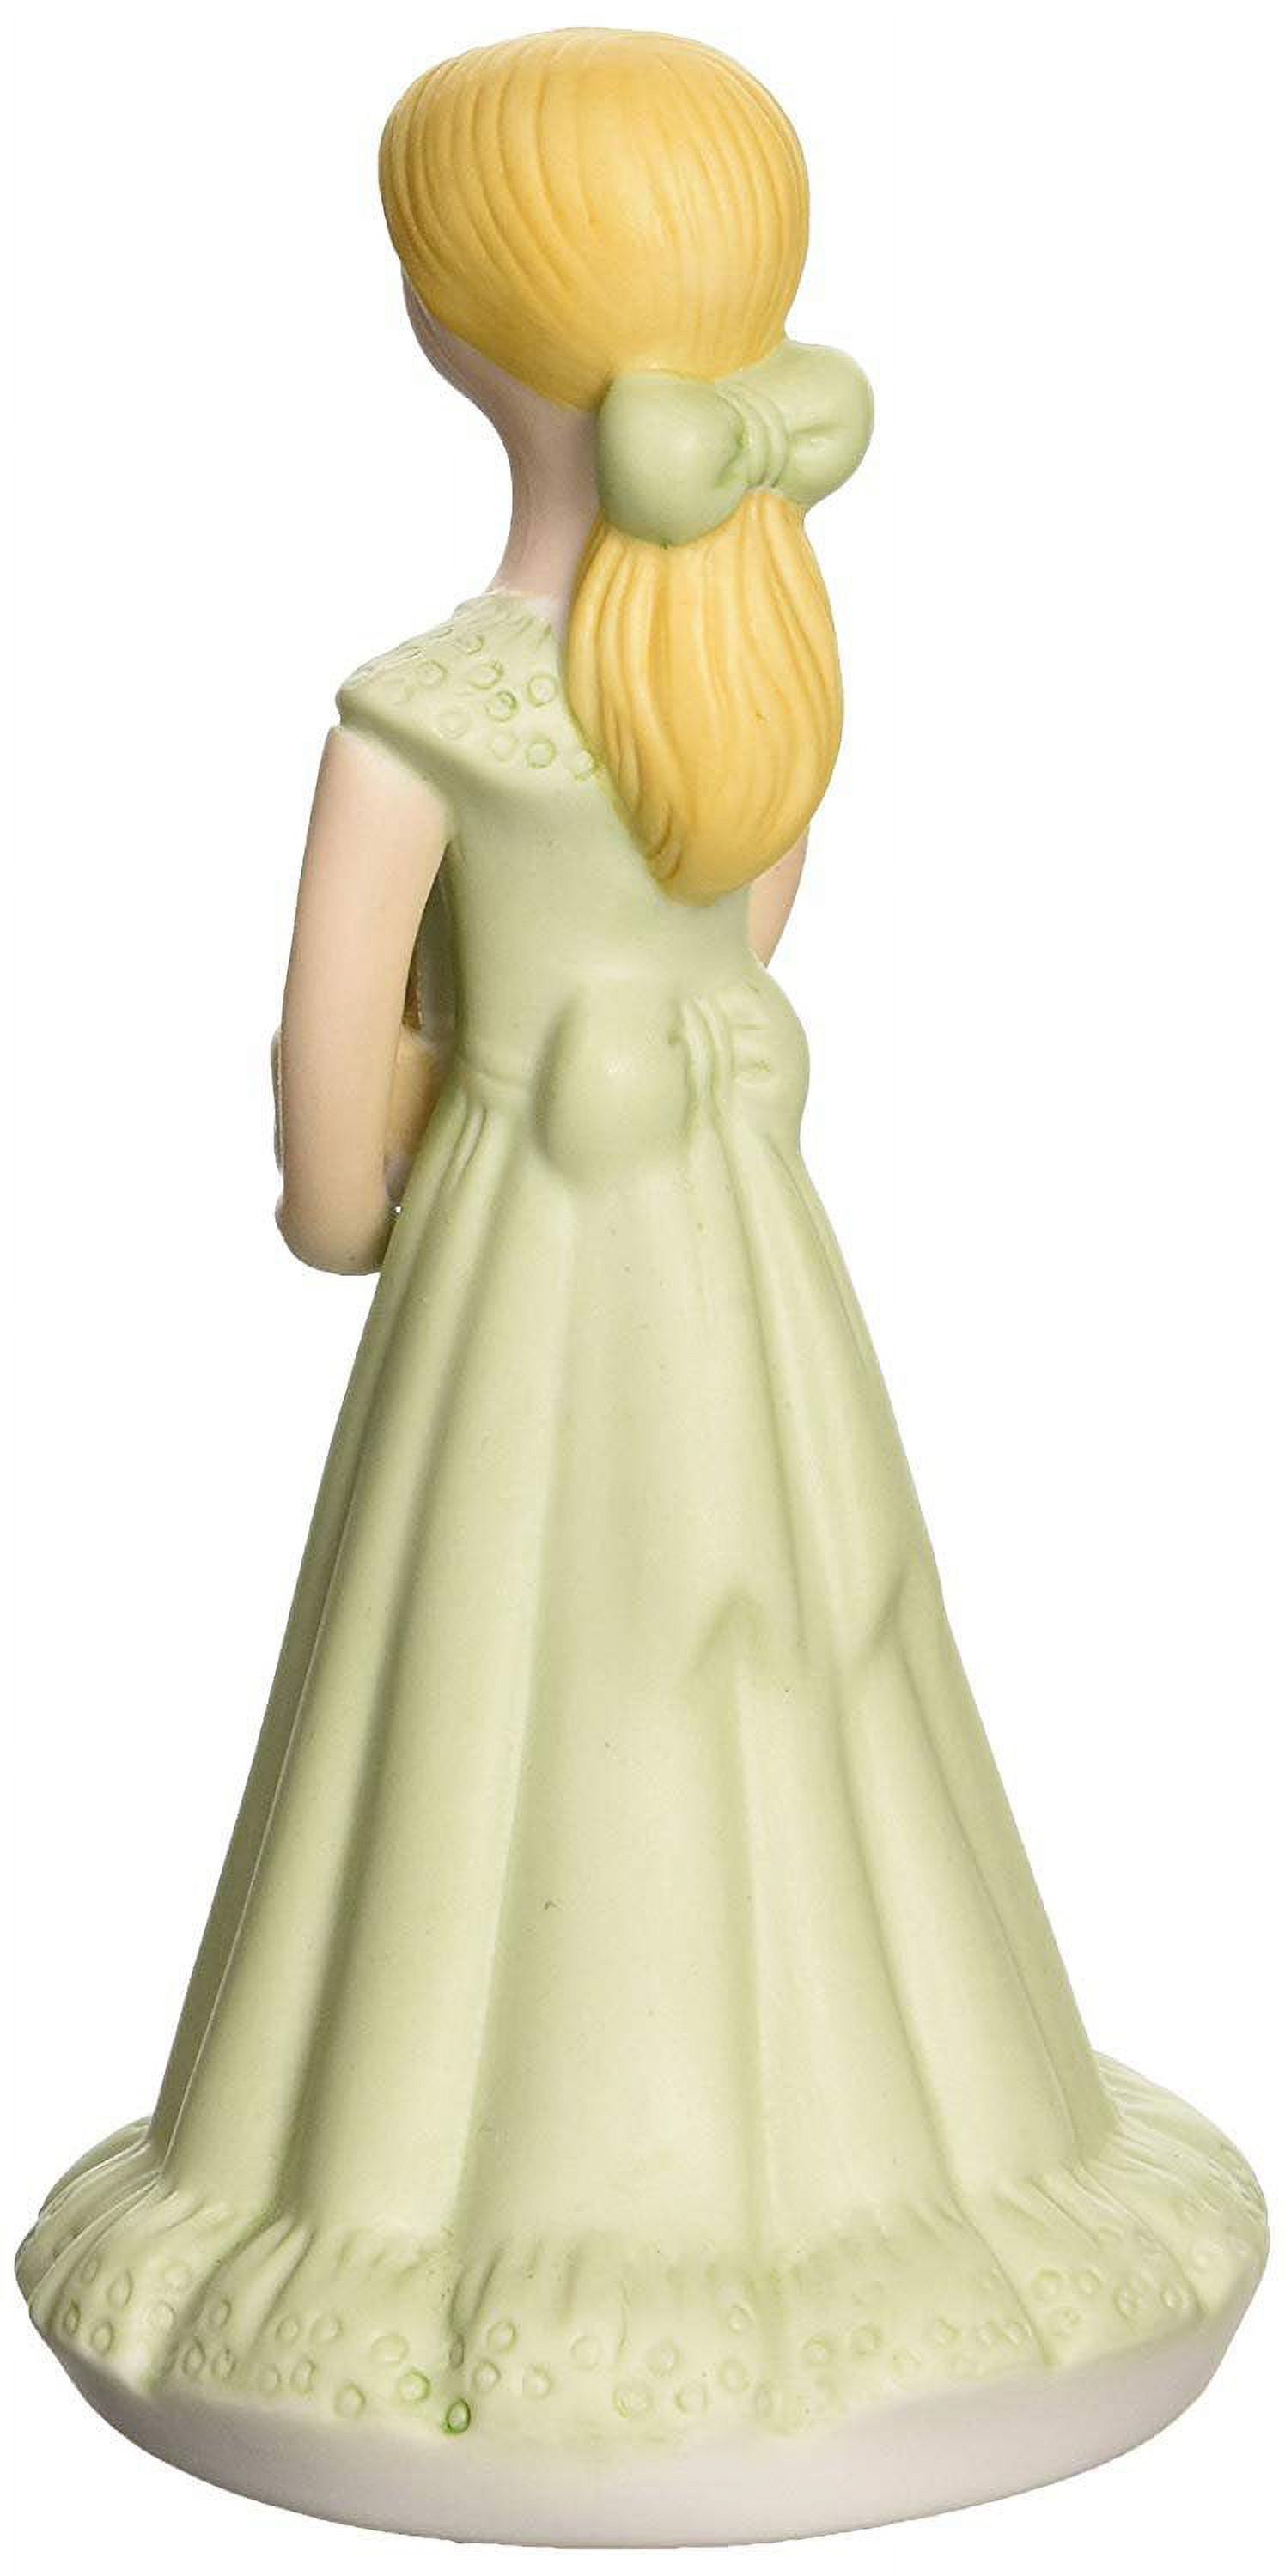 Growing Up Birthday Girls Blonde Age 11 Porcelain Bisque Figurine Q-GL638 - image 2 of 2